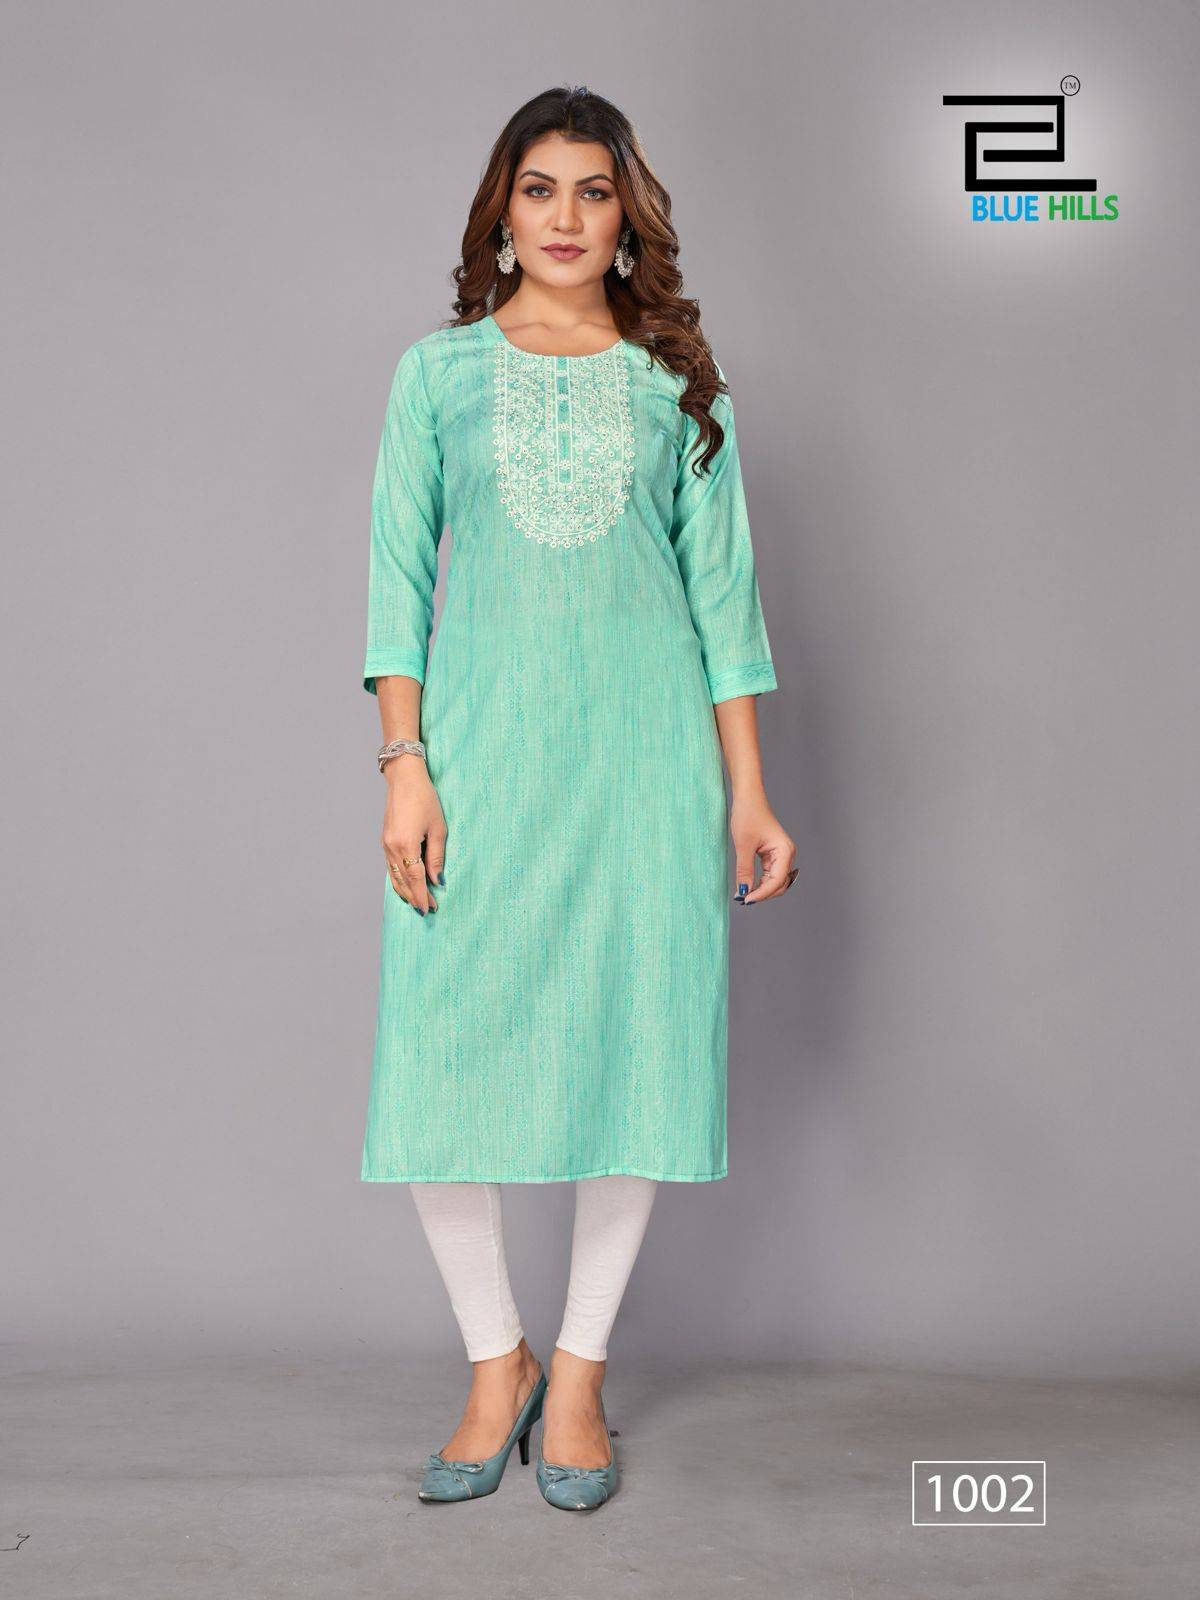 Billiards By Blue Hills 1001 To 1003 Series Designer Stylish Fancy Colorful Beautiful Party Wear & Ethnic Wear Collection Rayon Jacquard Kurtis At Wholesale Price